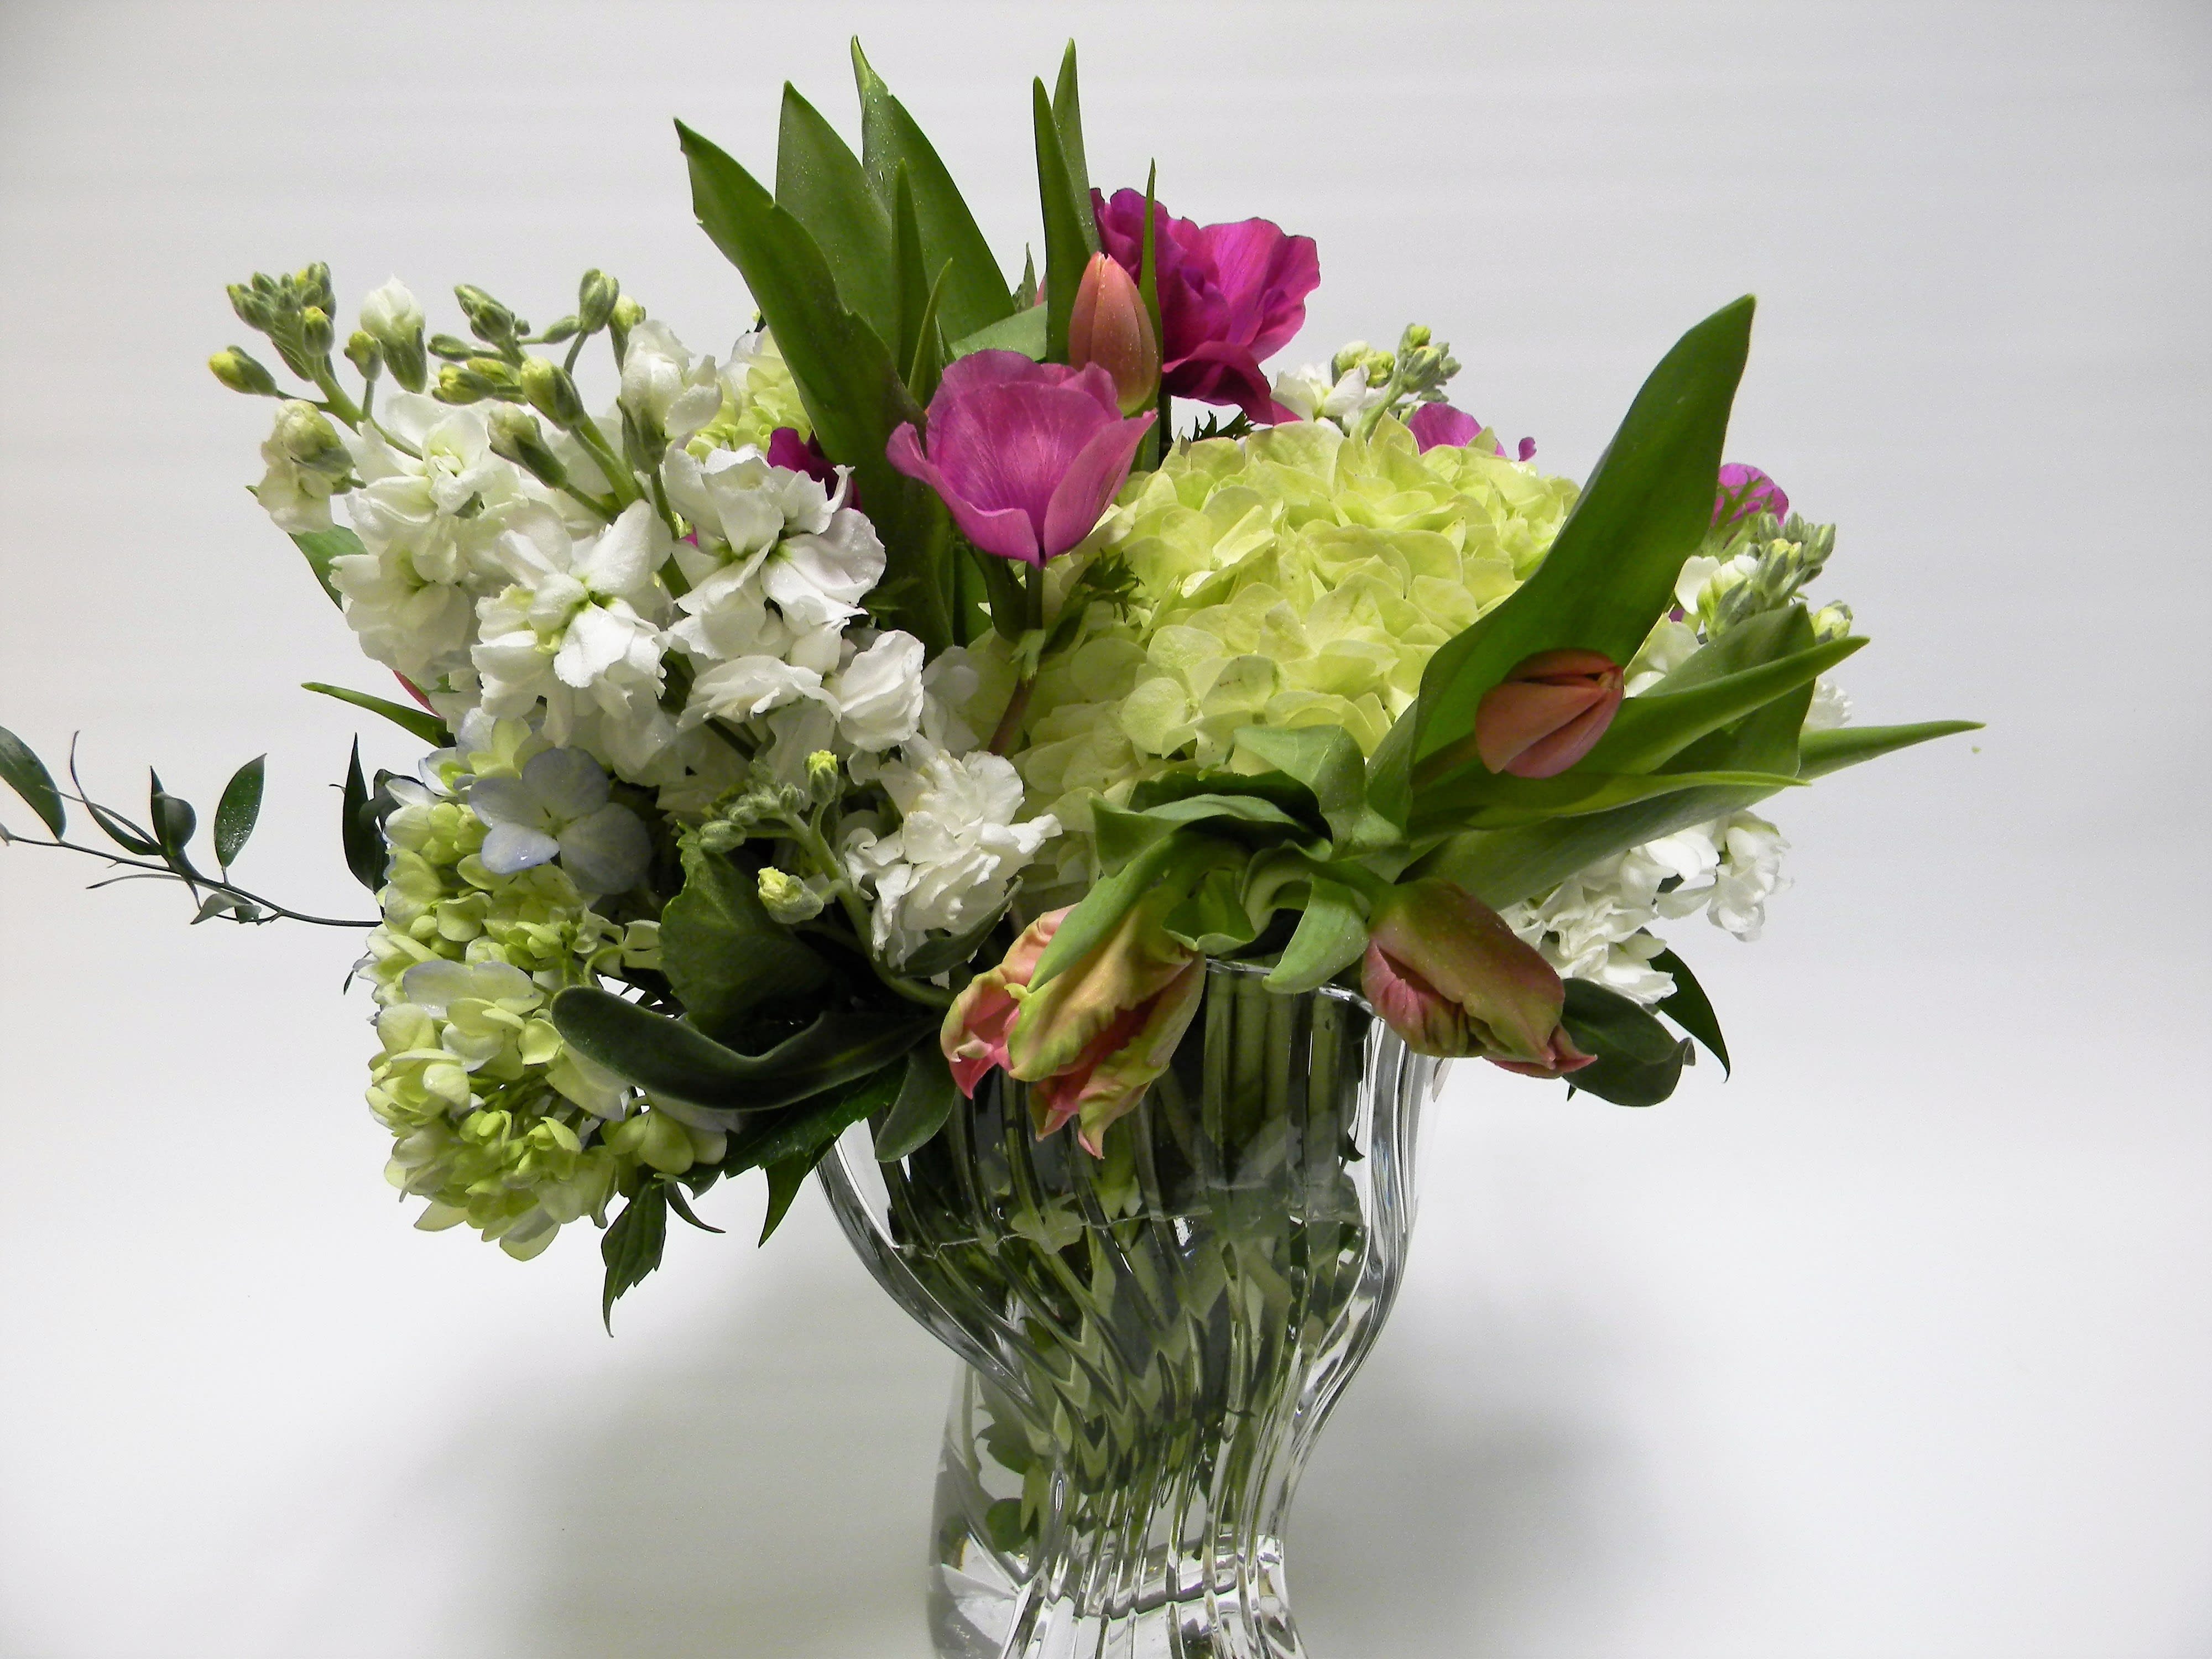 Crystal vase - A beautiful crystal vase filled with tulips, stock and hydrangea